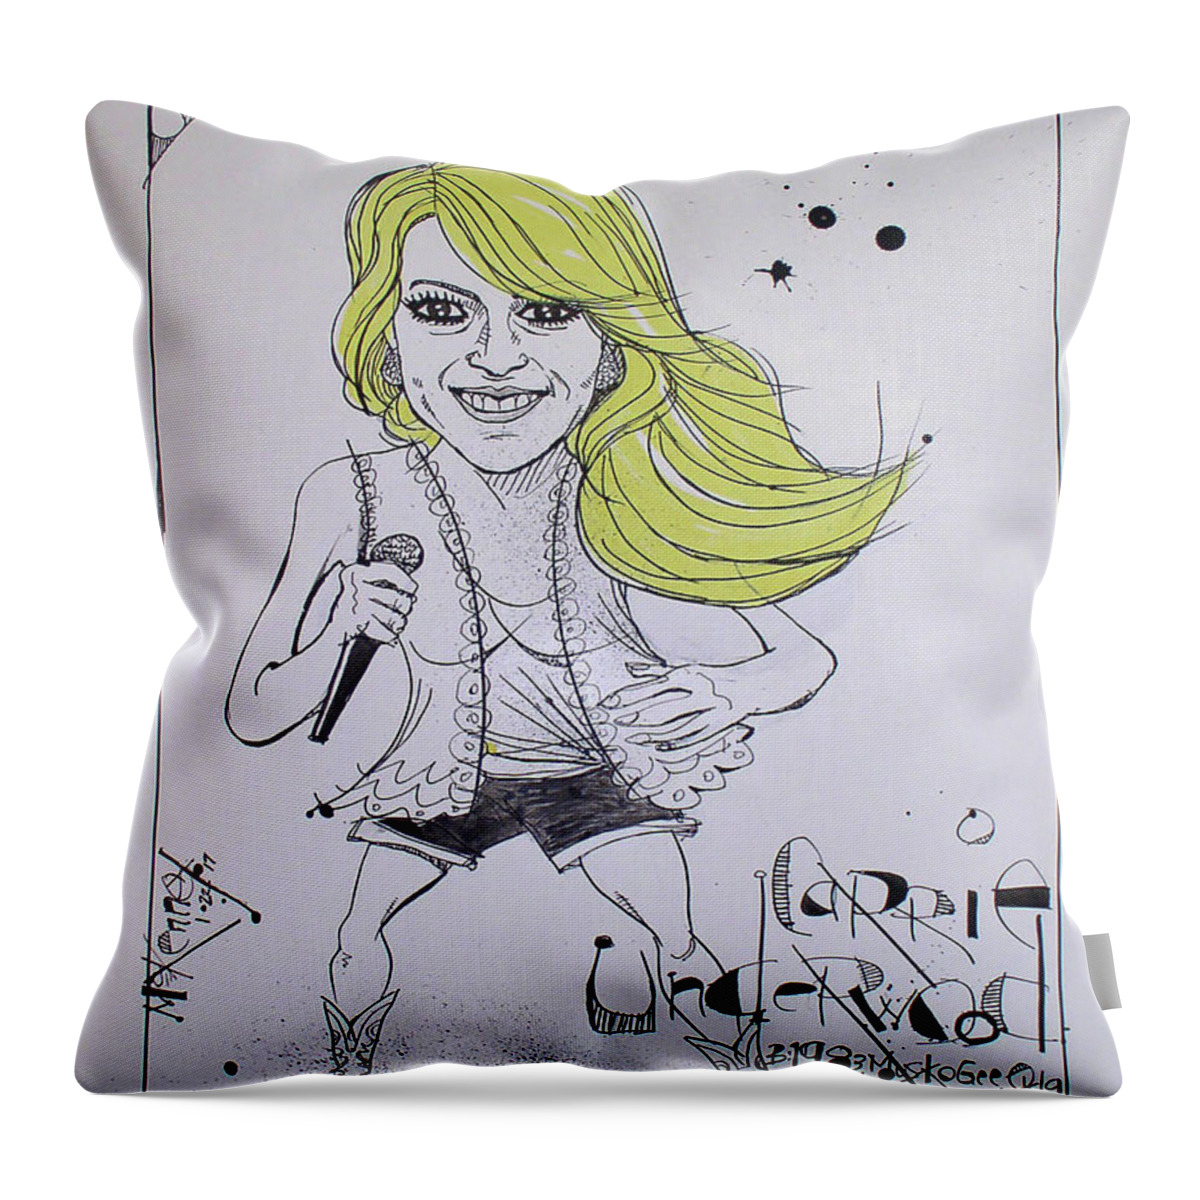  Throw Pillow featuring the drawing Carrie Underwood by Phil Mckenney